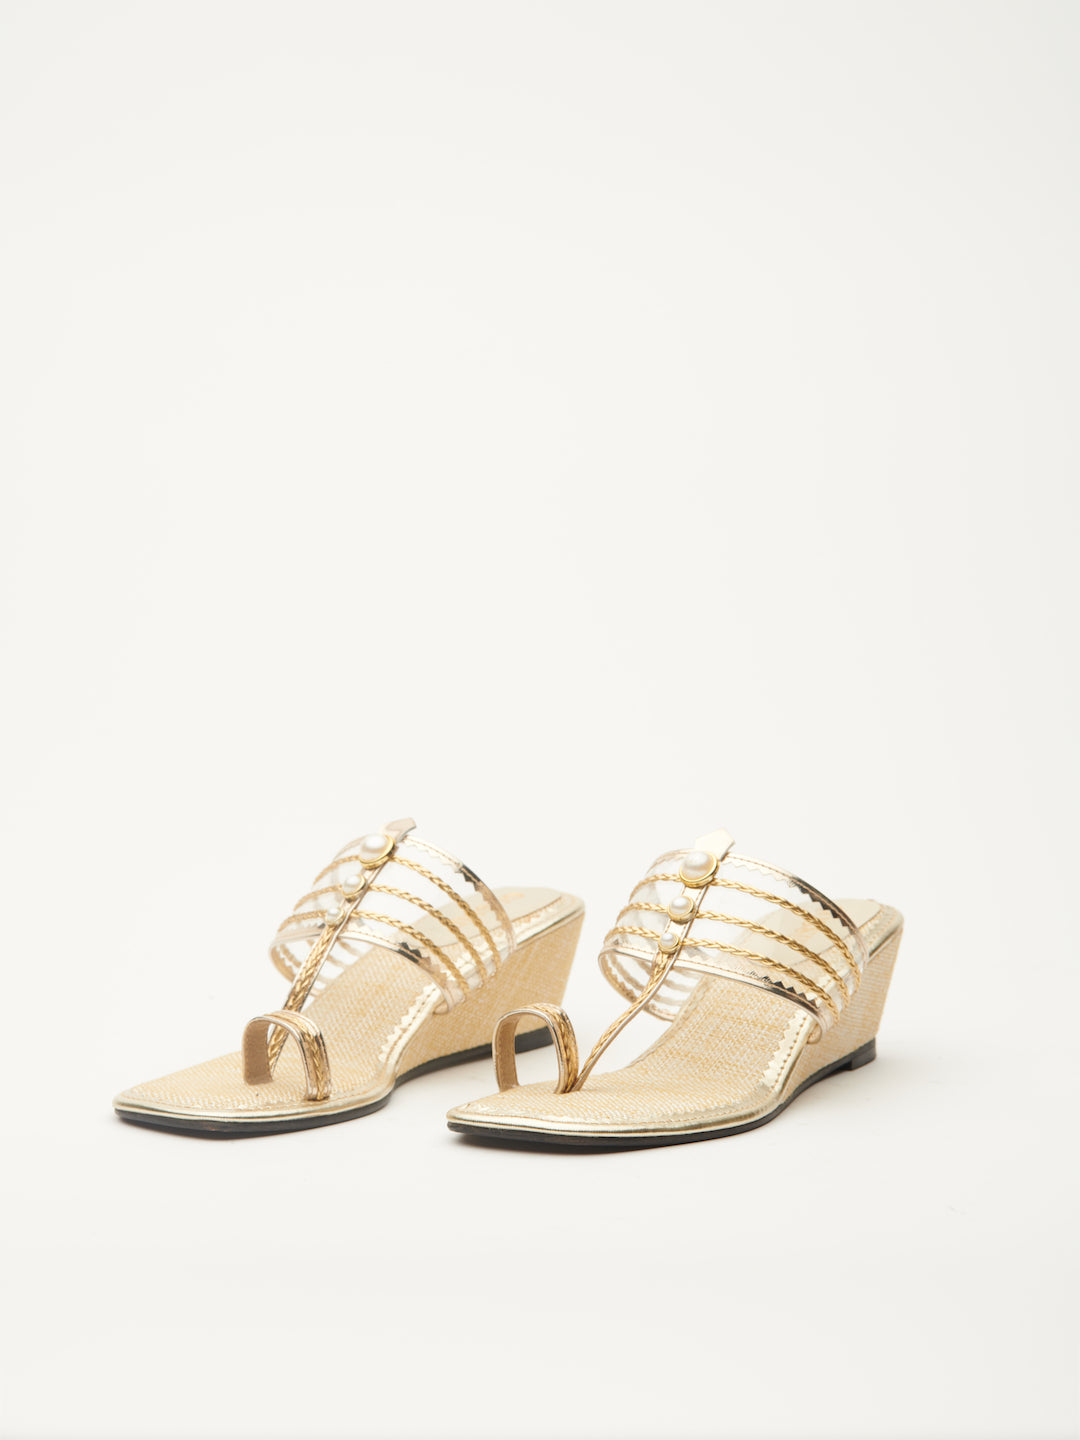 'PEARL'SUIT OF HAPPINESS WEDGES